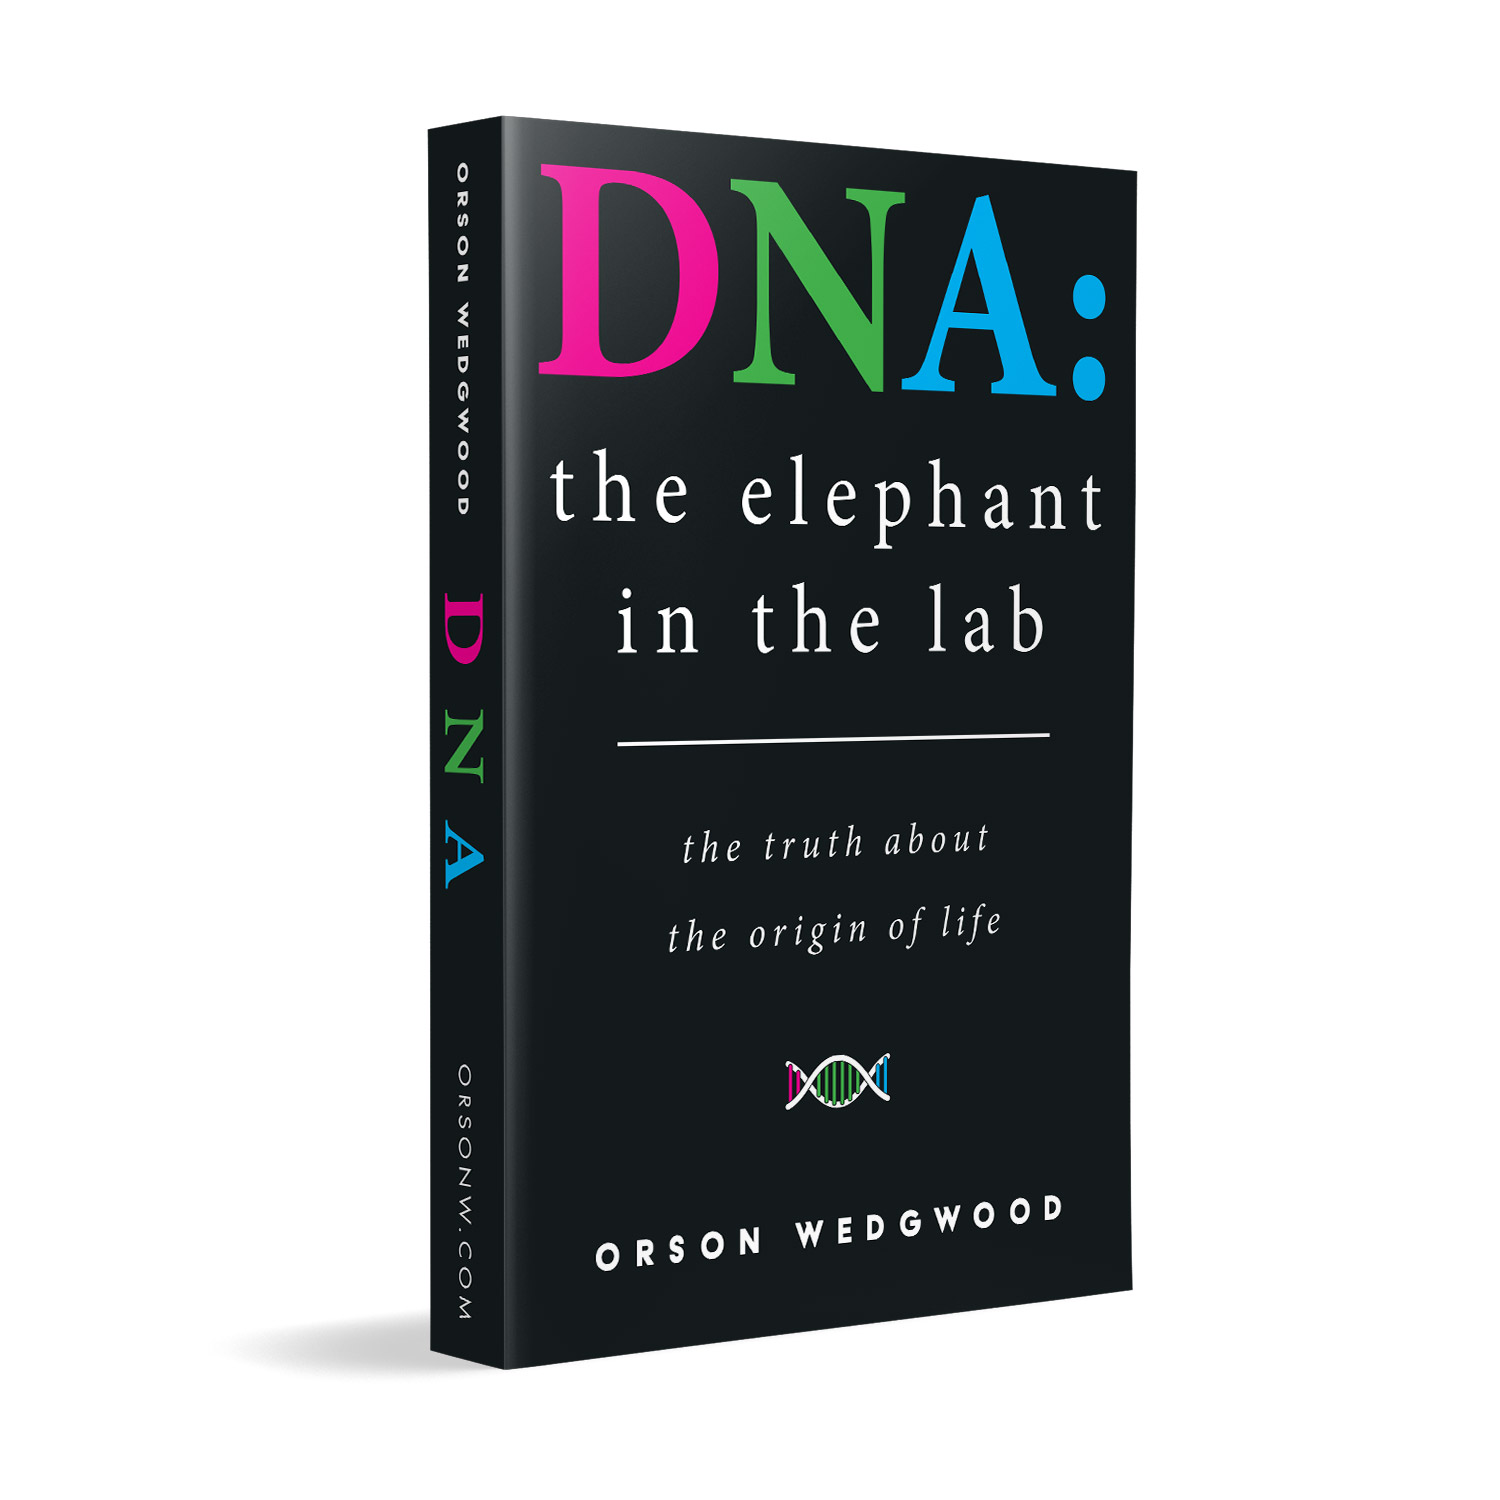 'DNA: The Elephant In the Lab' is a science and faith meditation on the origins of life. The author is Orson Wedgwood. The book cover & interior design is by Mark Thomas. To learn more about what Mark could do for your book, please visit coverness.com.